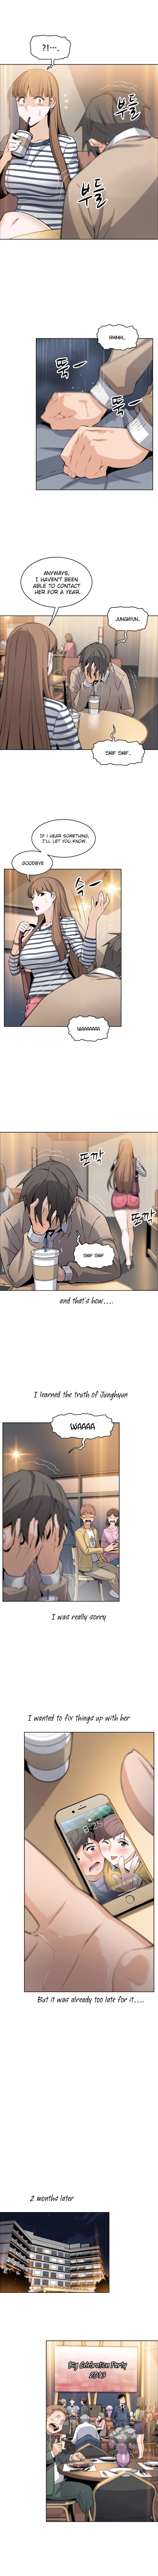 Housekeeper Manhwa - Chapter 6 Page 7